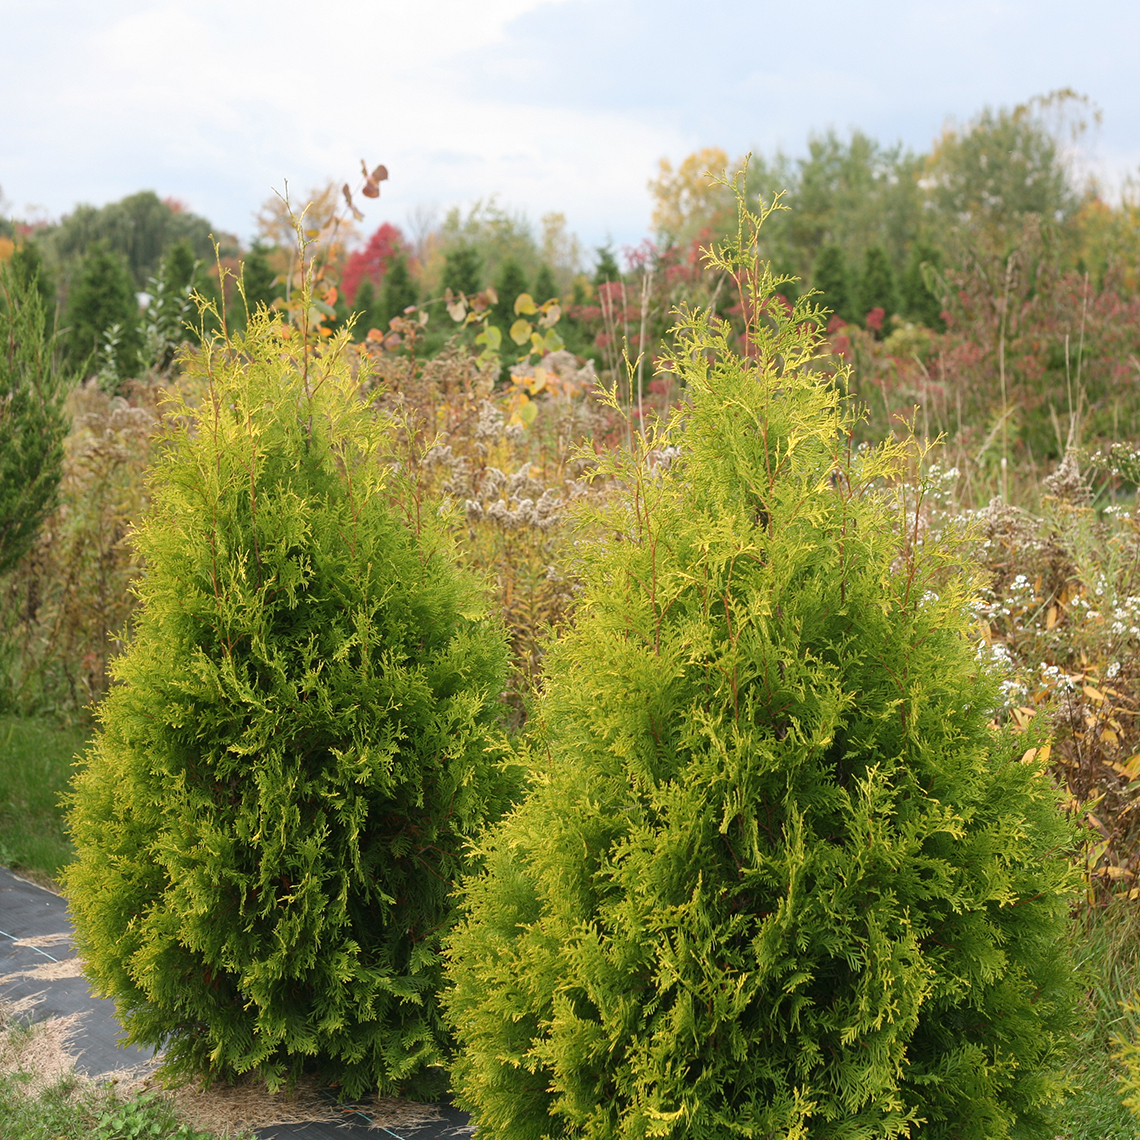 Two specimens of Polar Gold arborvitae growing in a field showing their pyramidal habit and golden foliage